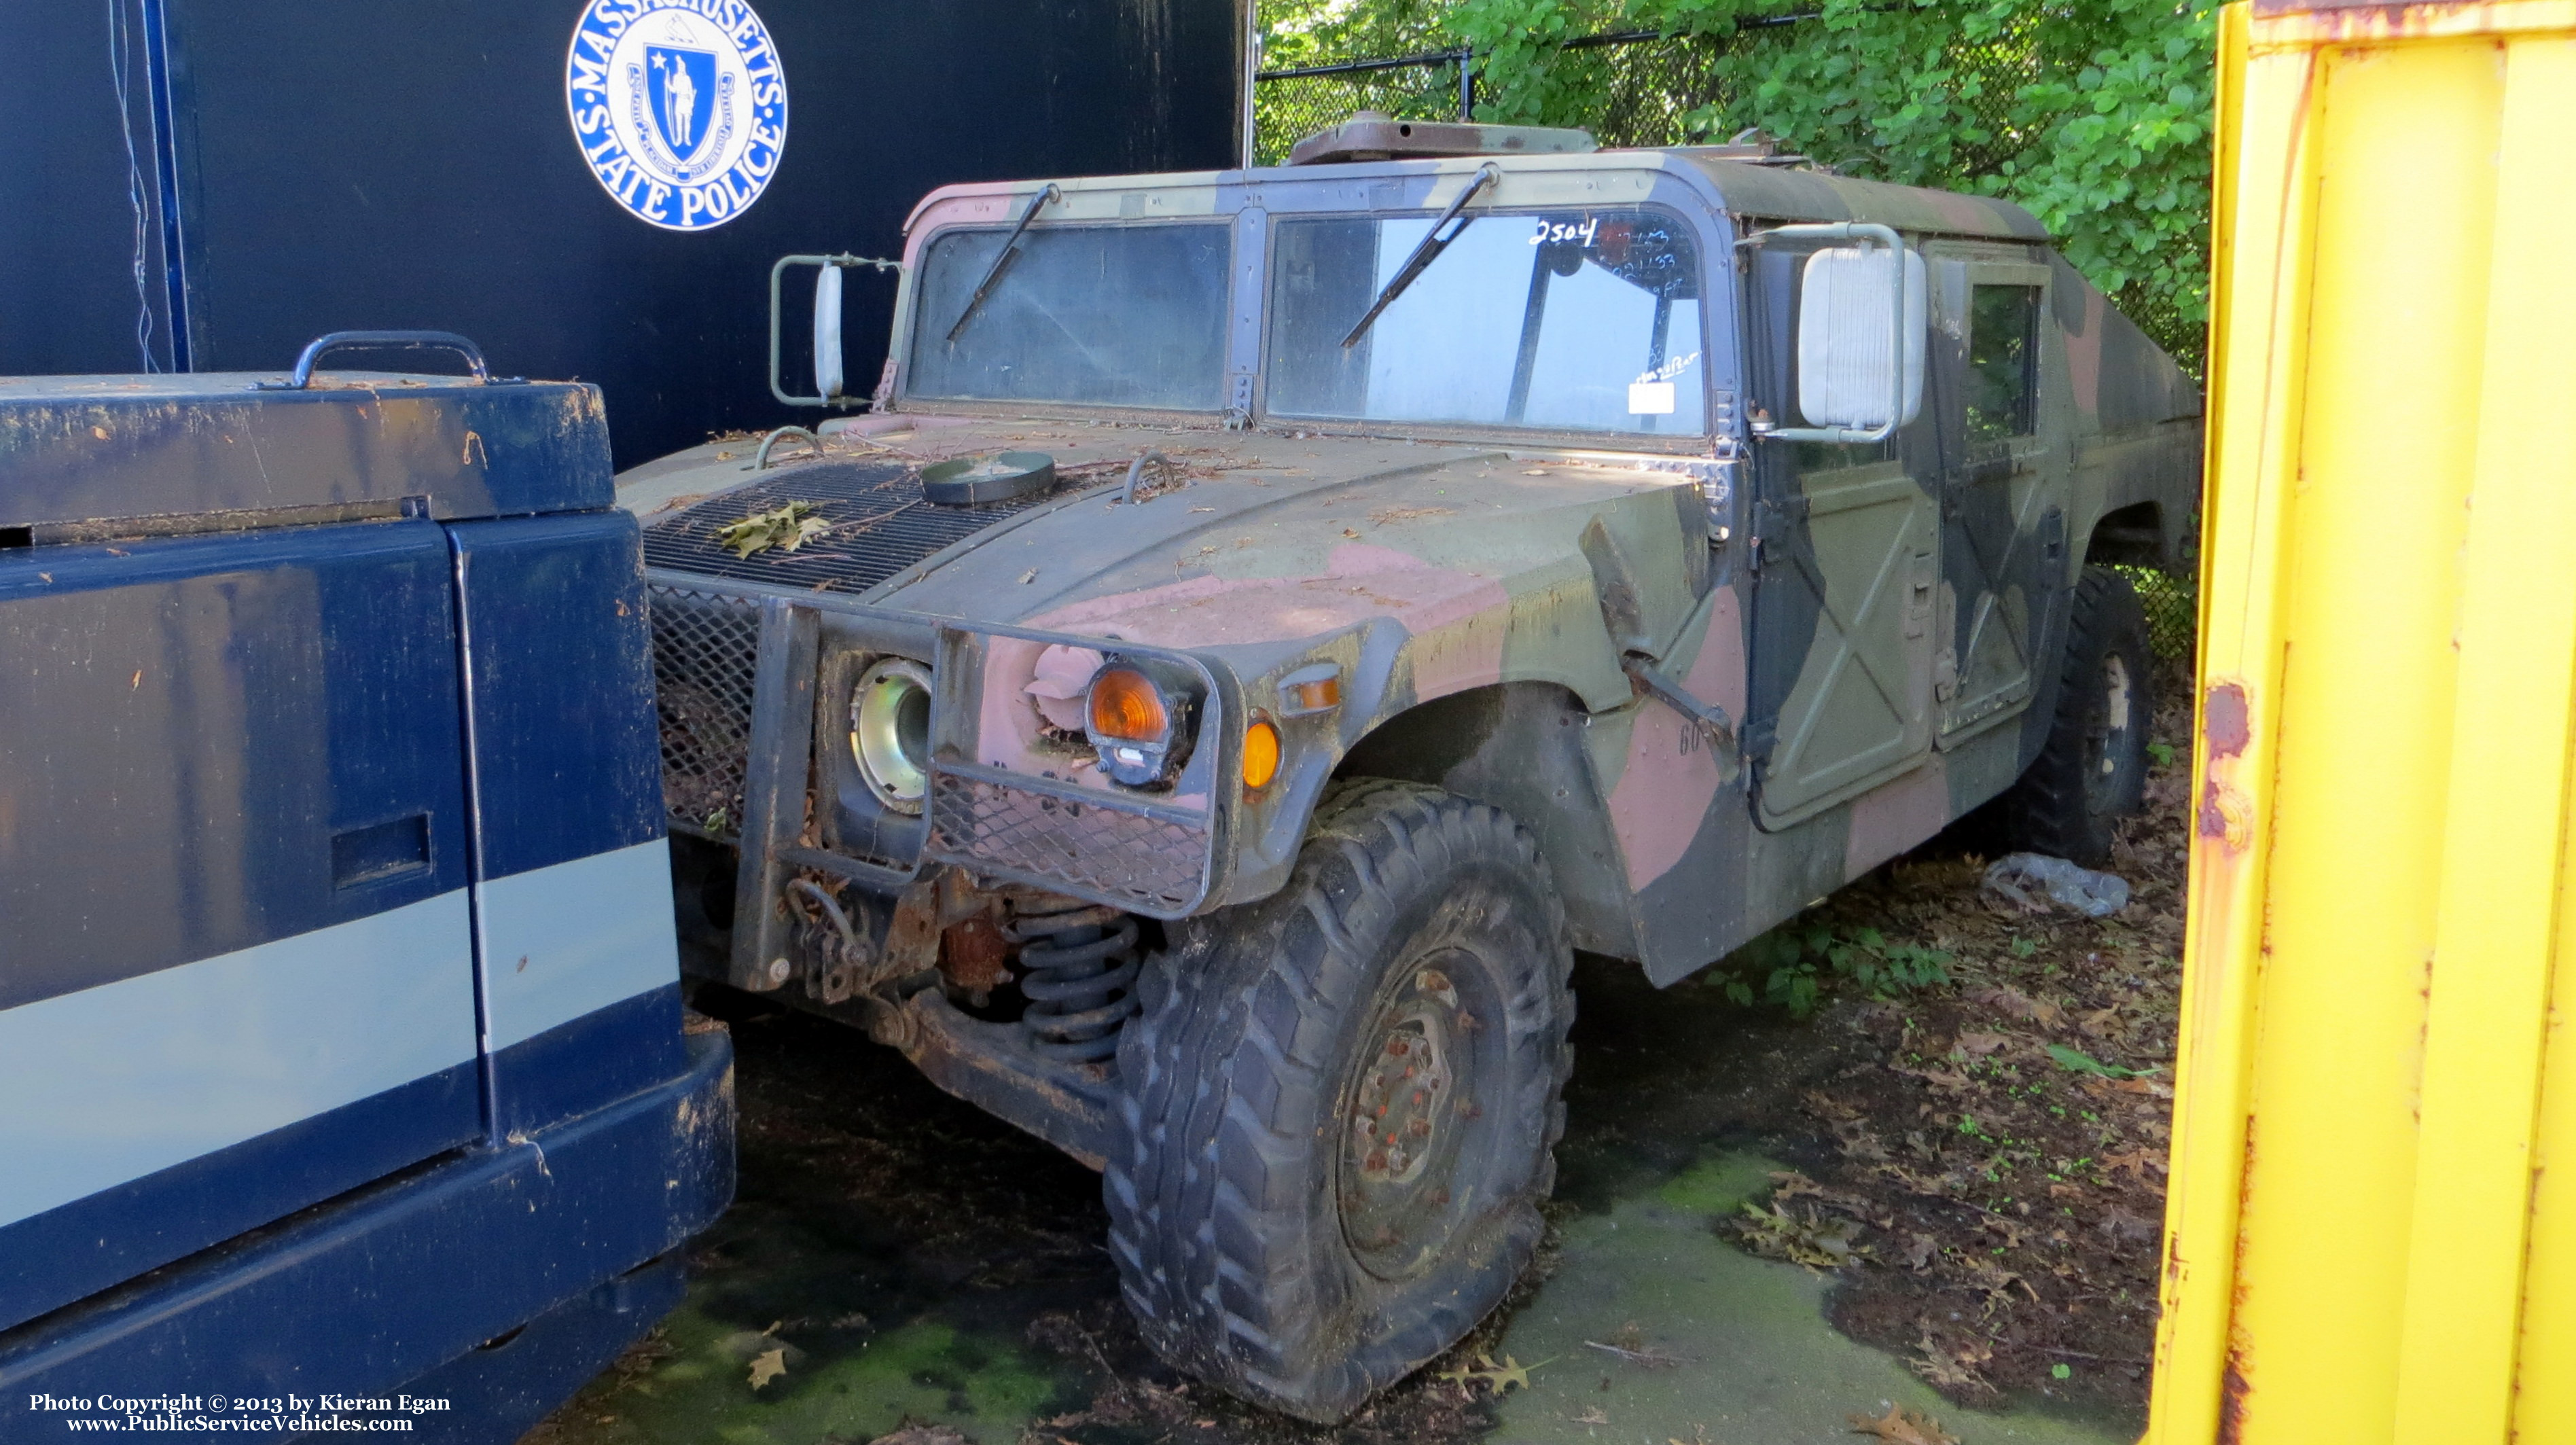 A photo  of Massachusetts State Police
            Hummer 2504, a 1993 AM General Hummer H3             taken by Kieran Egan